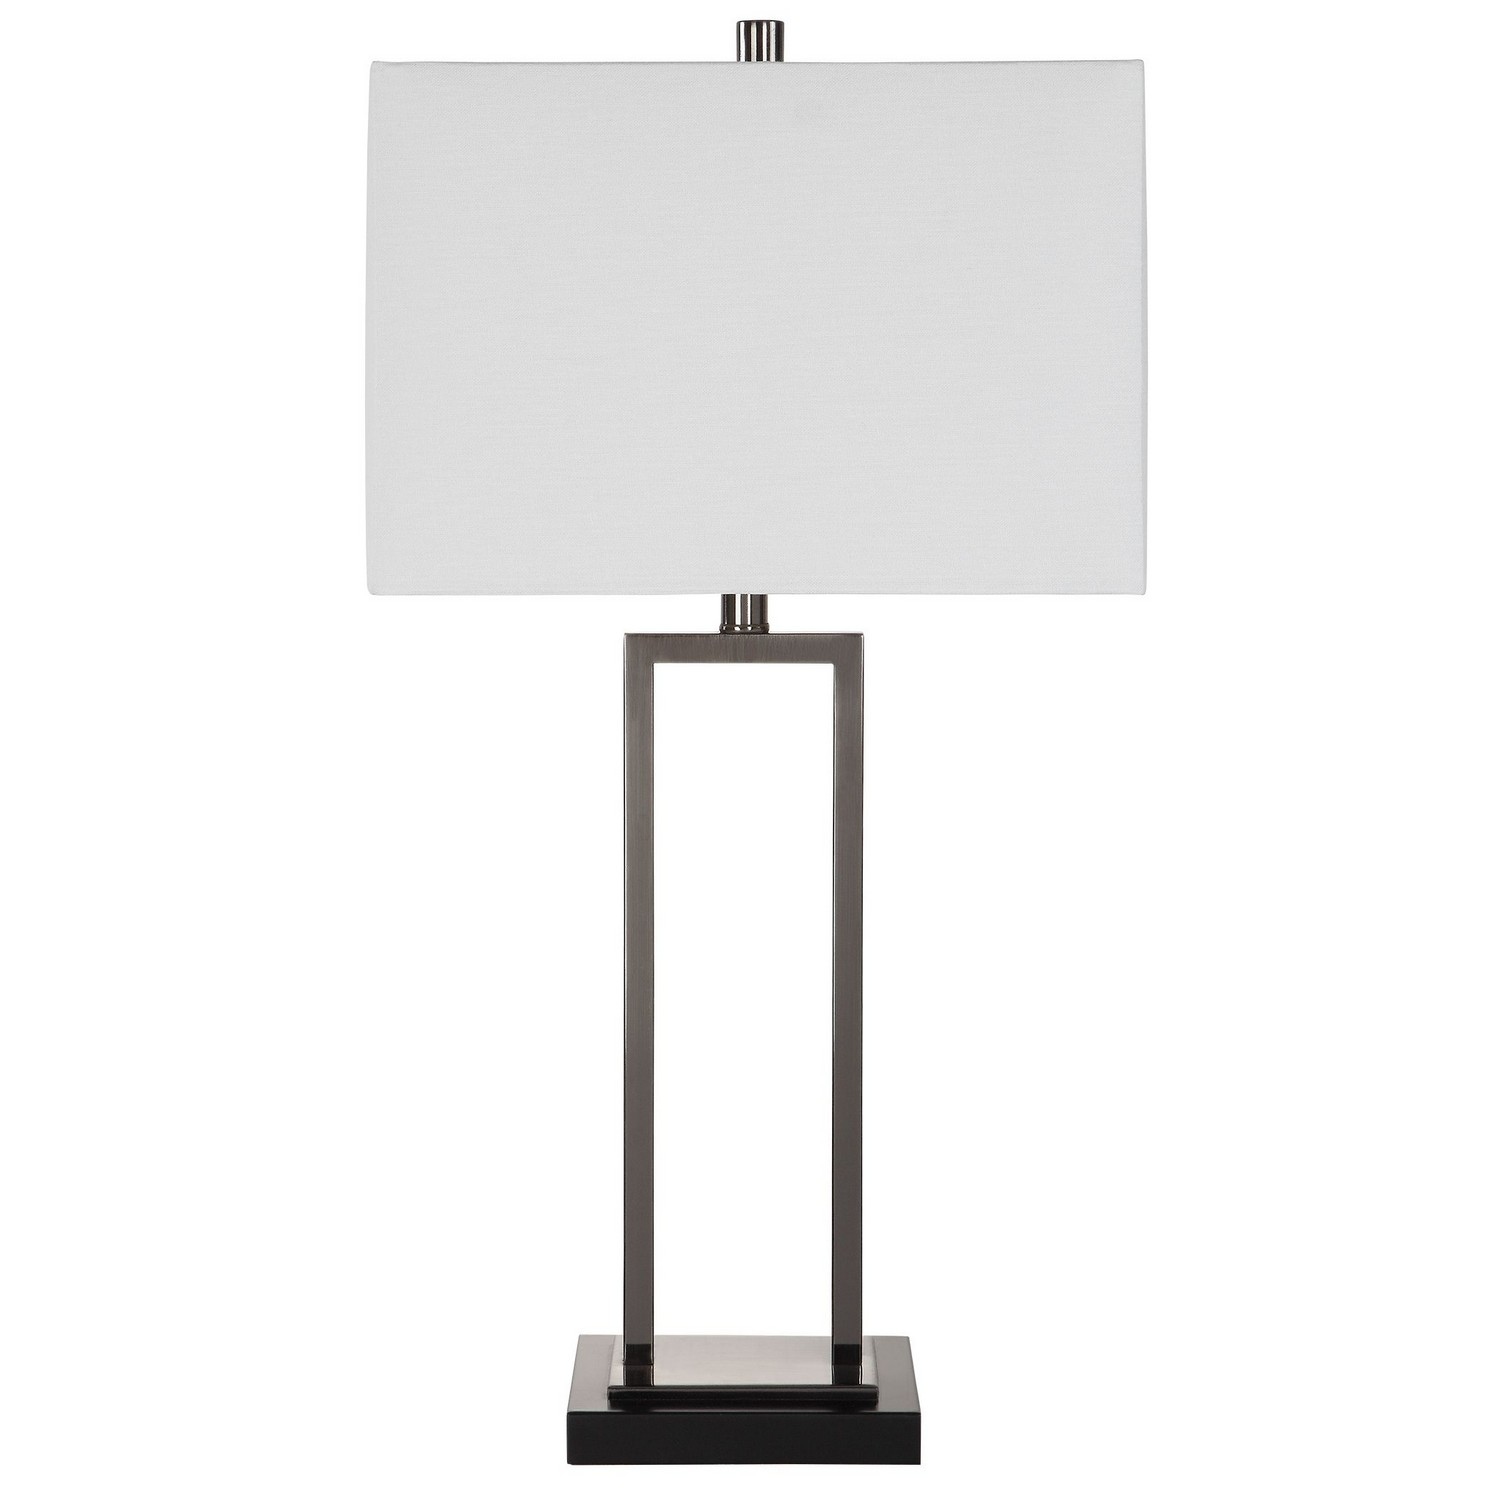 Uttermost W26086-1 Table Lamp - Black/Brushed Nickel